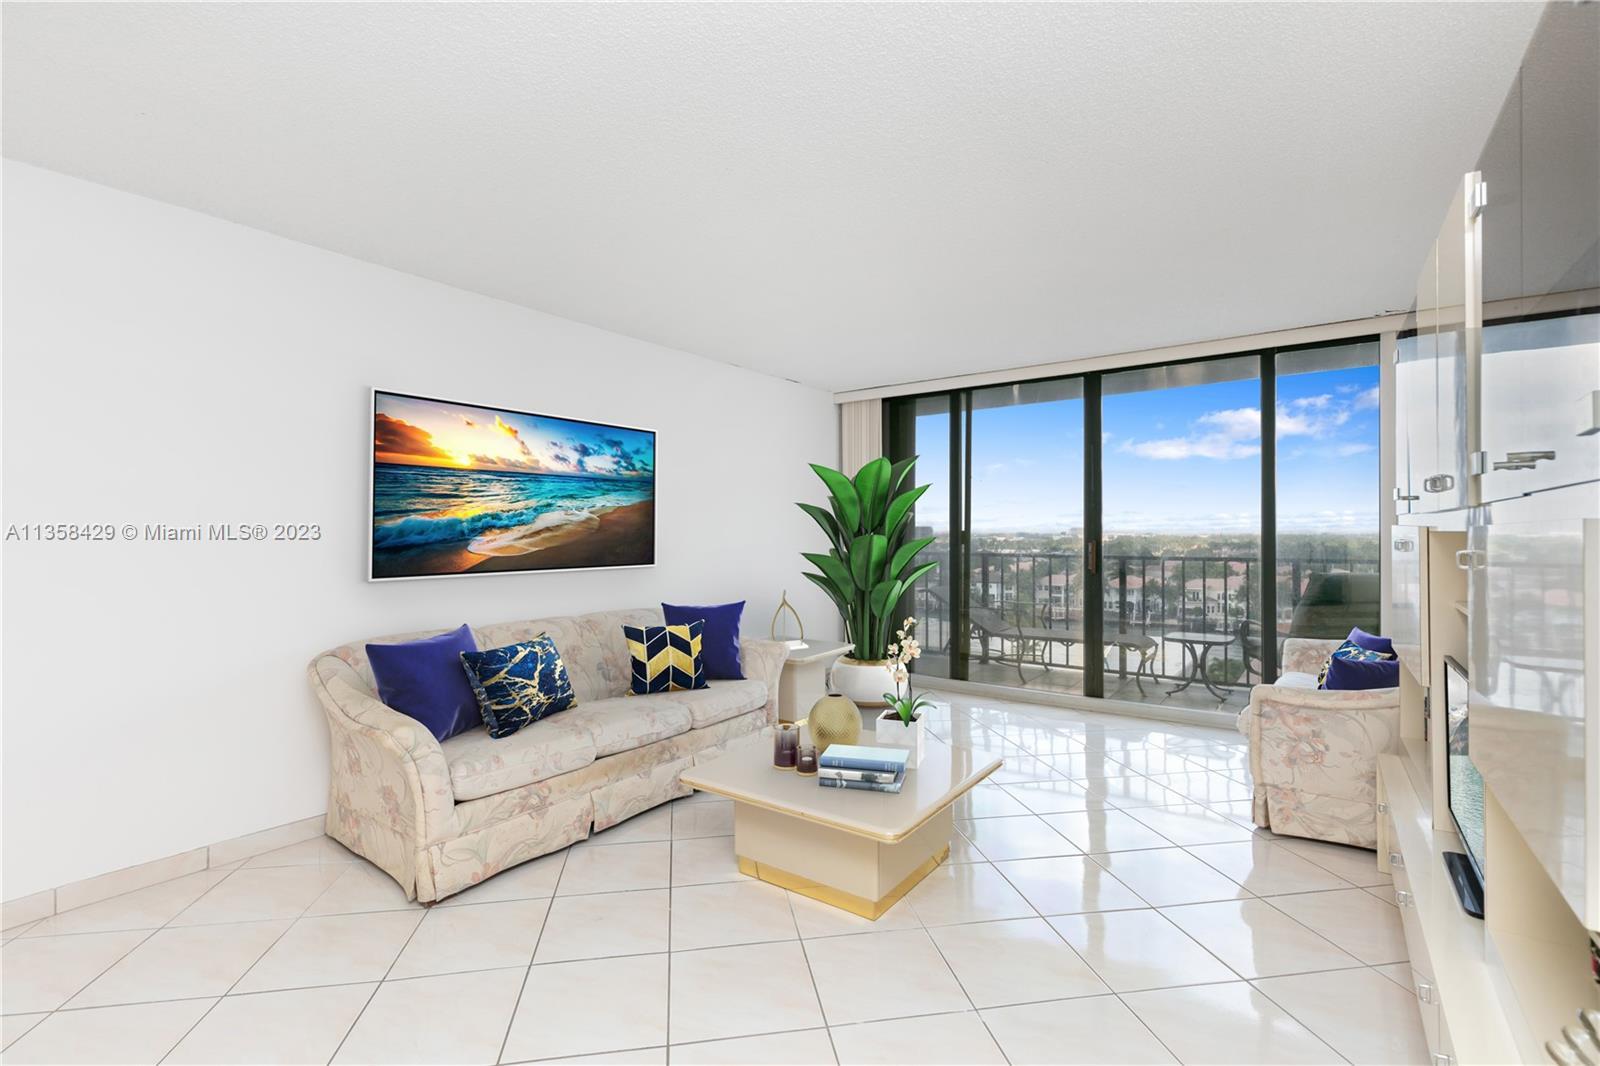 Located in the heart of Hollywood, Florida, this1-bedroom condo offers a clean and spacious living s